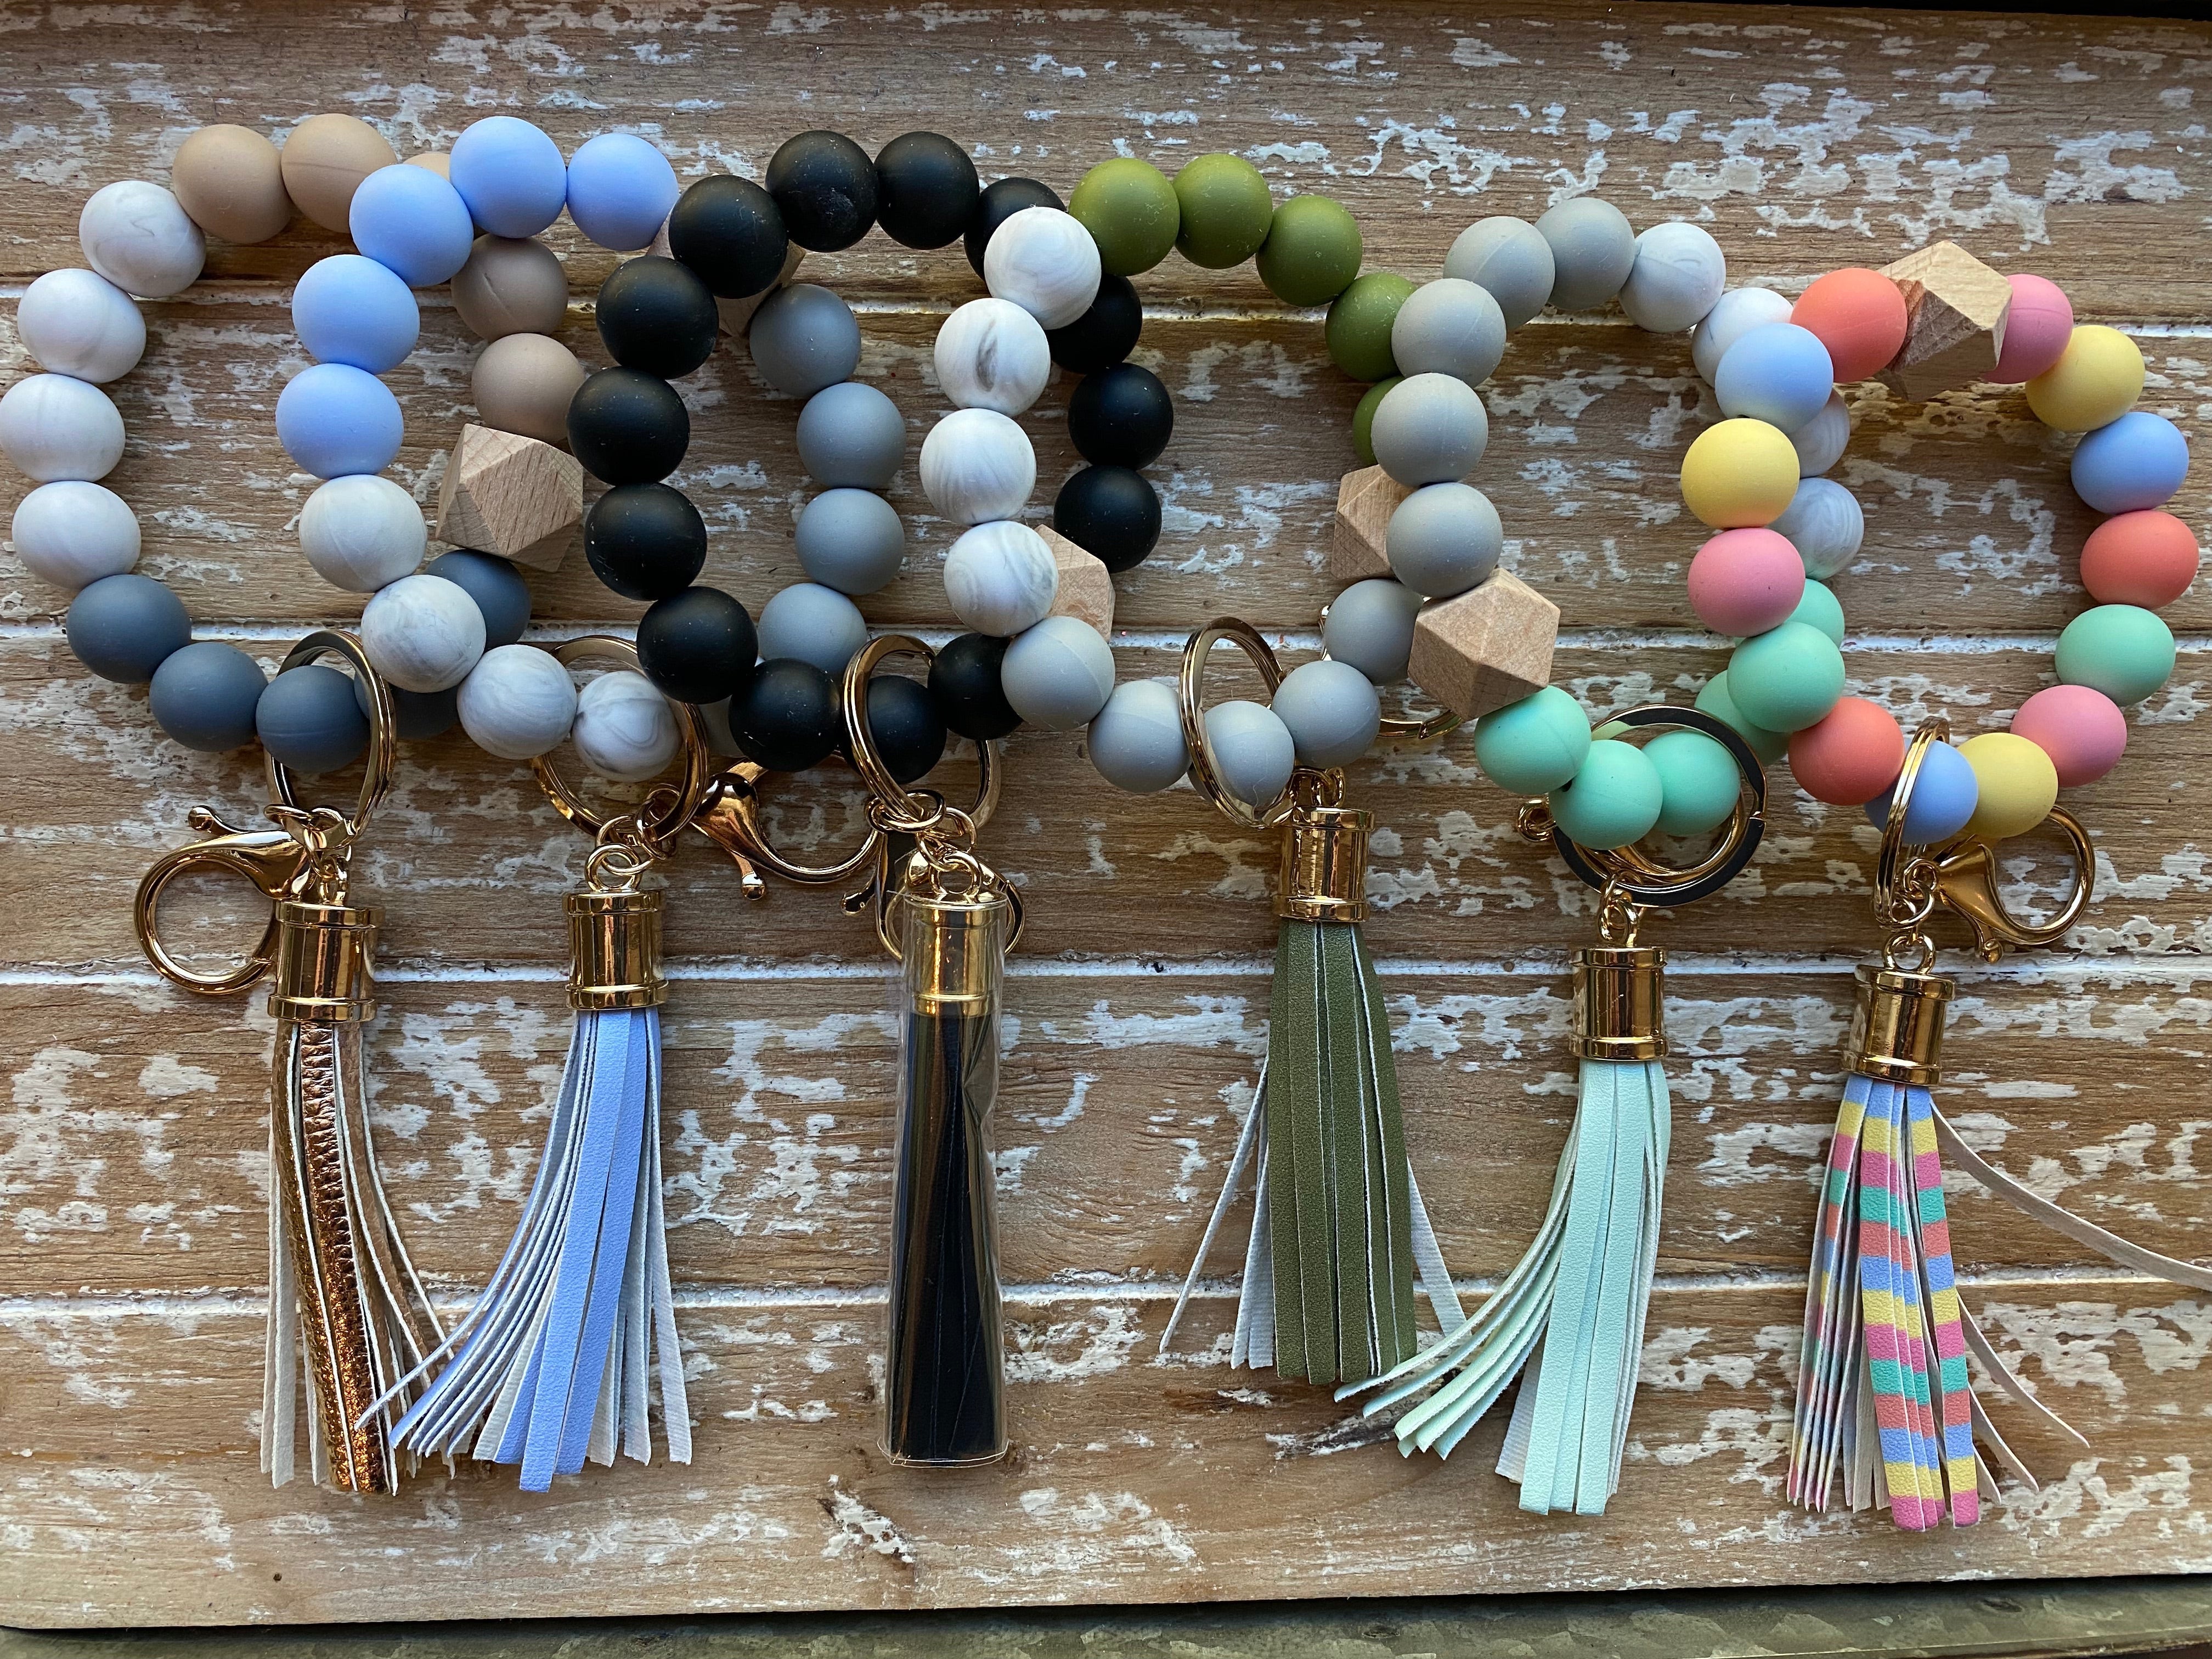 MULTIPLE COLORS: Silicone Beaded Key Ring Keychain